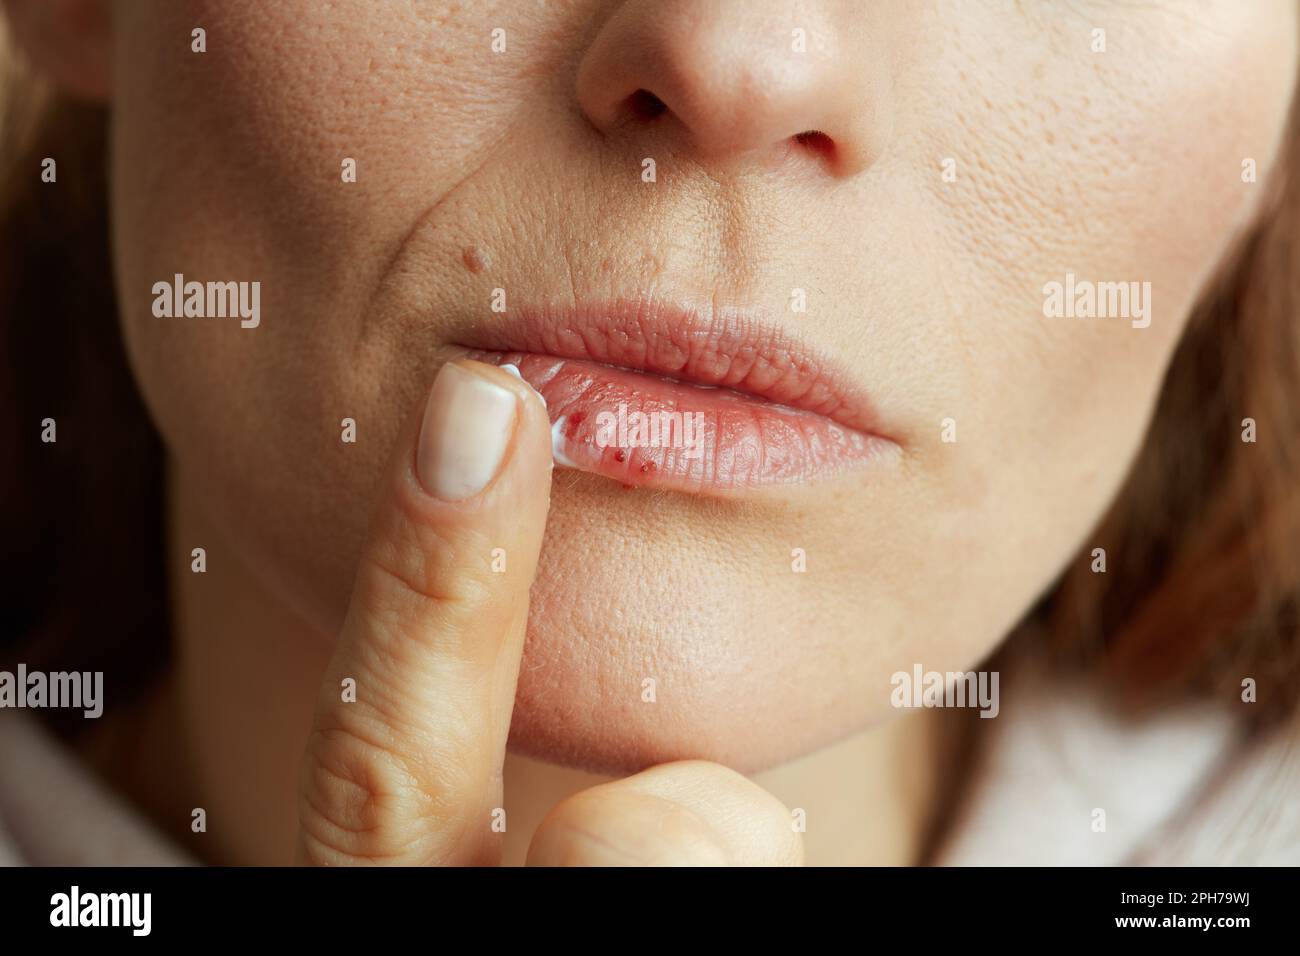 Closeup on female with herpes on lips applying ointment using finger on beige background. Stock Photo